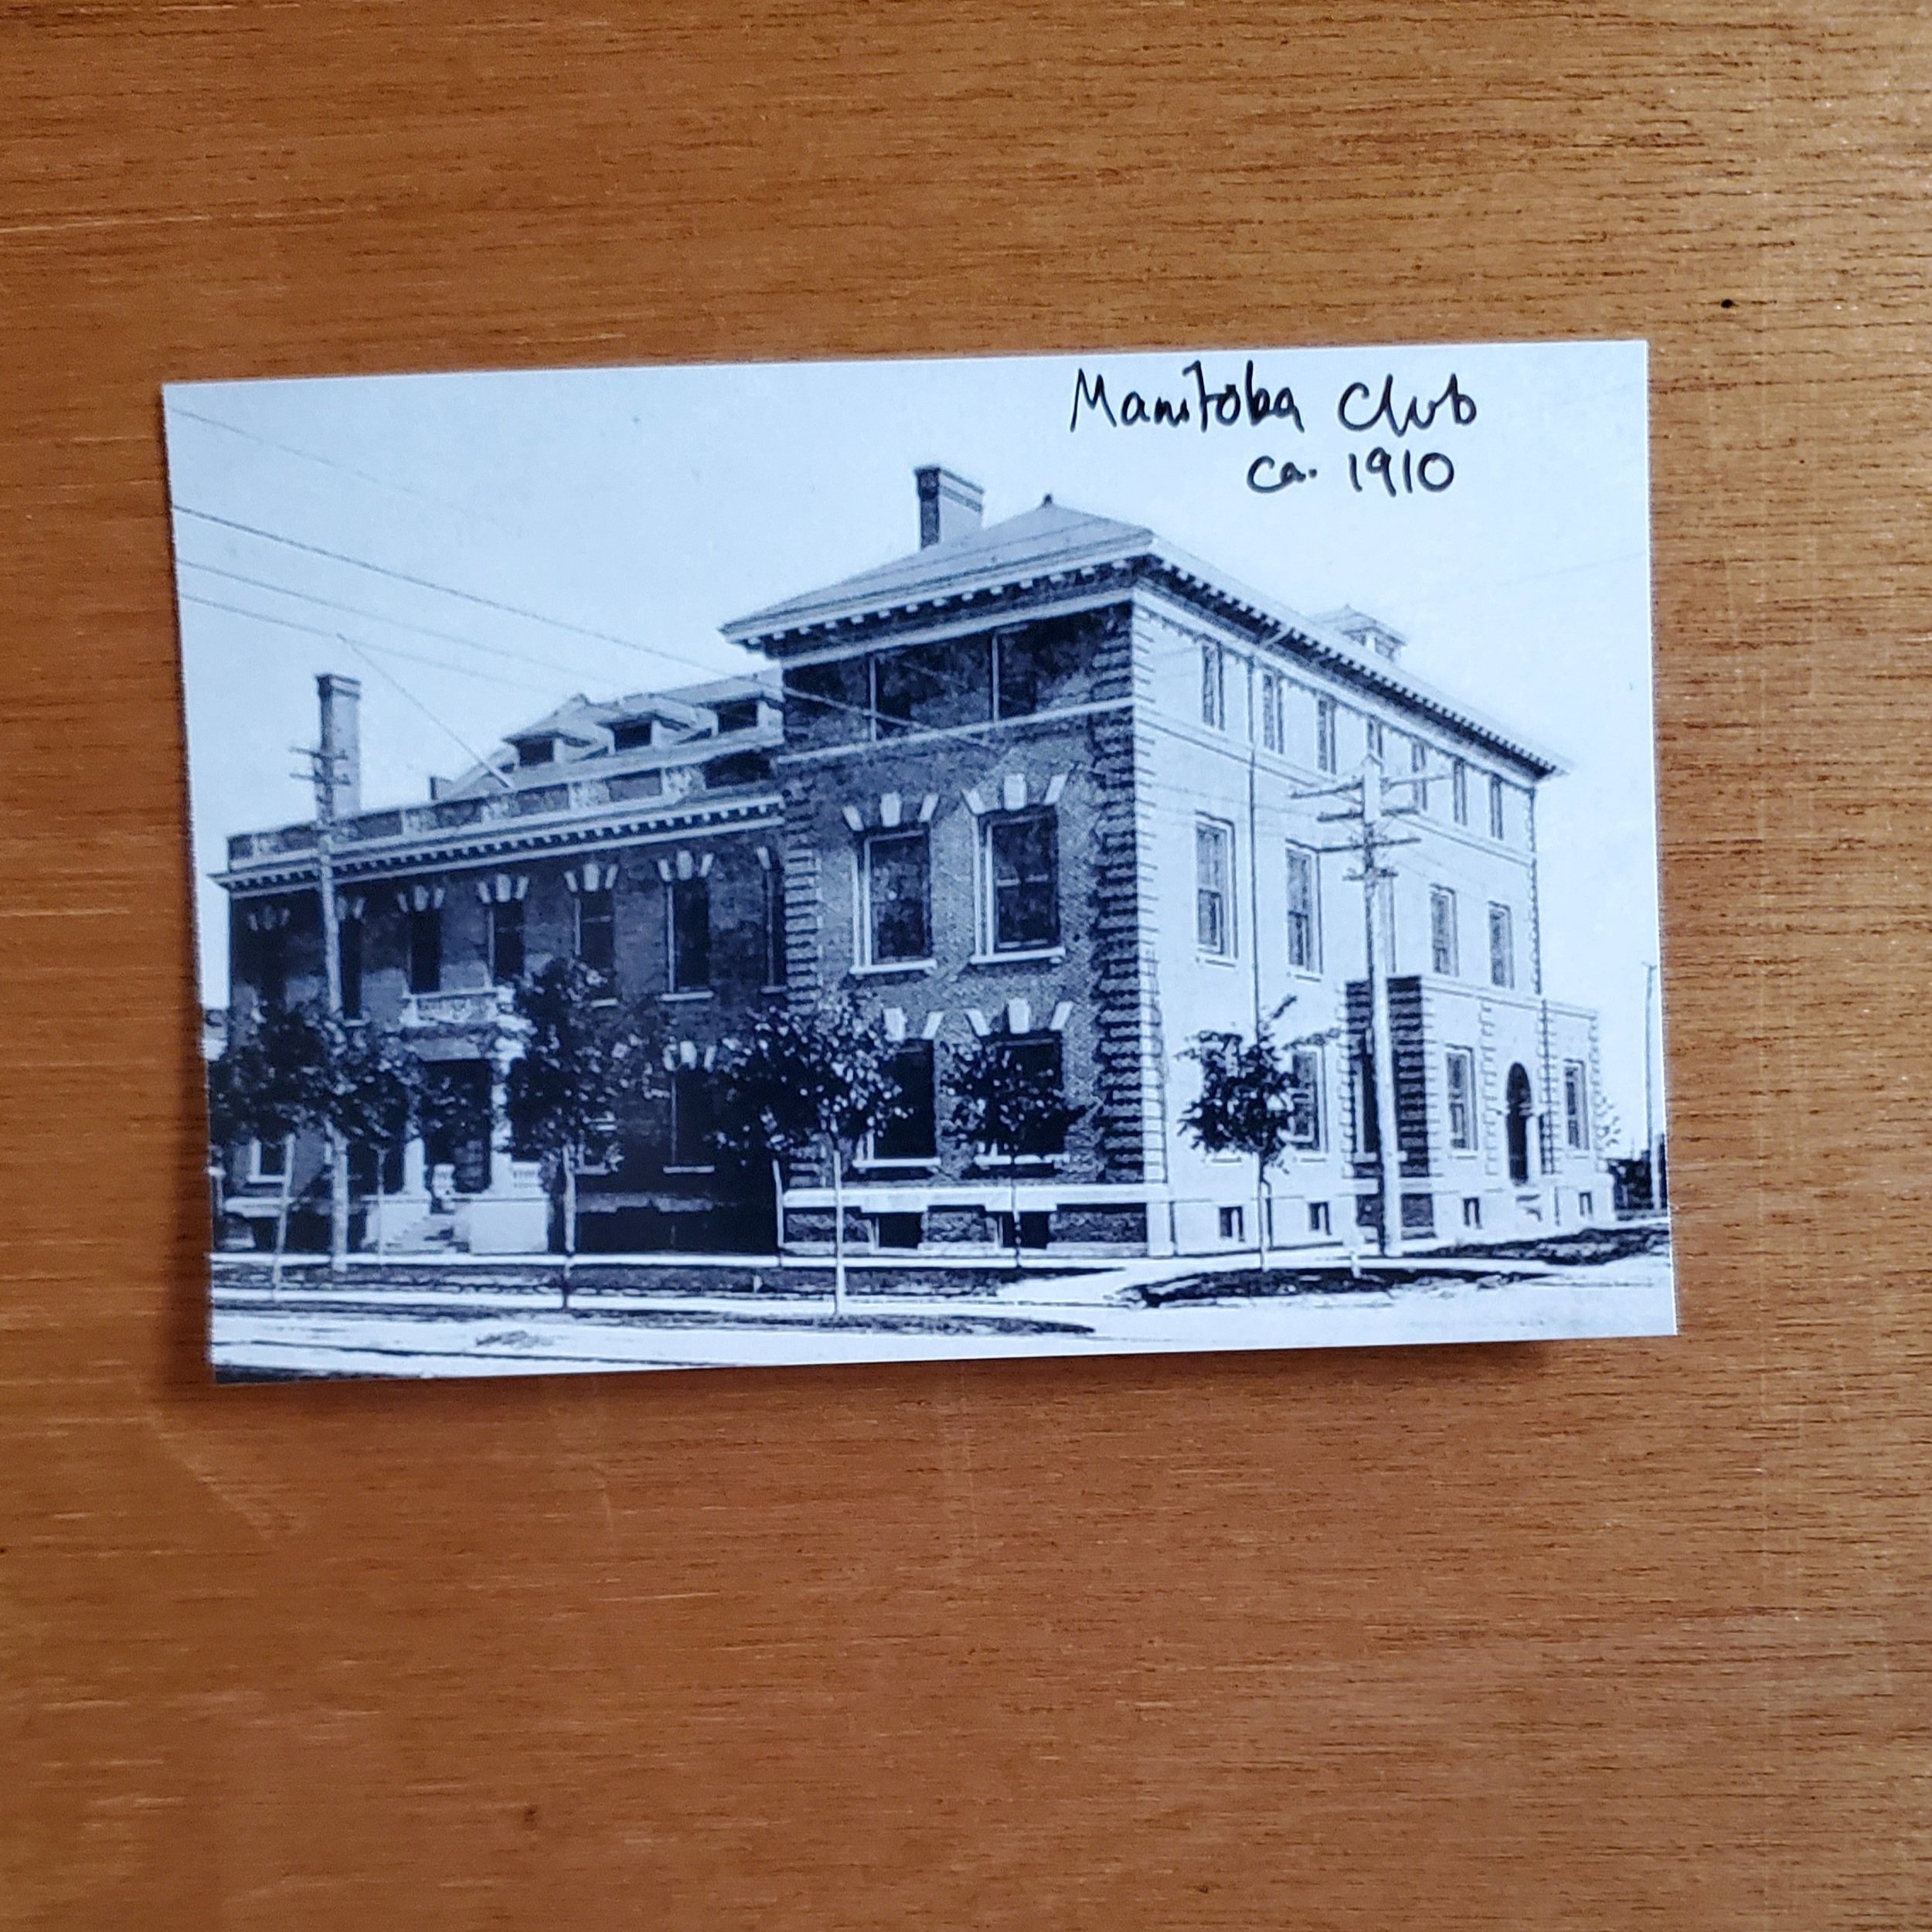  A photo of the Manitoba Club taken in 1910 